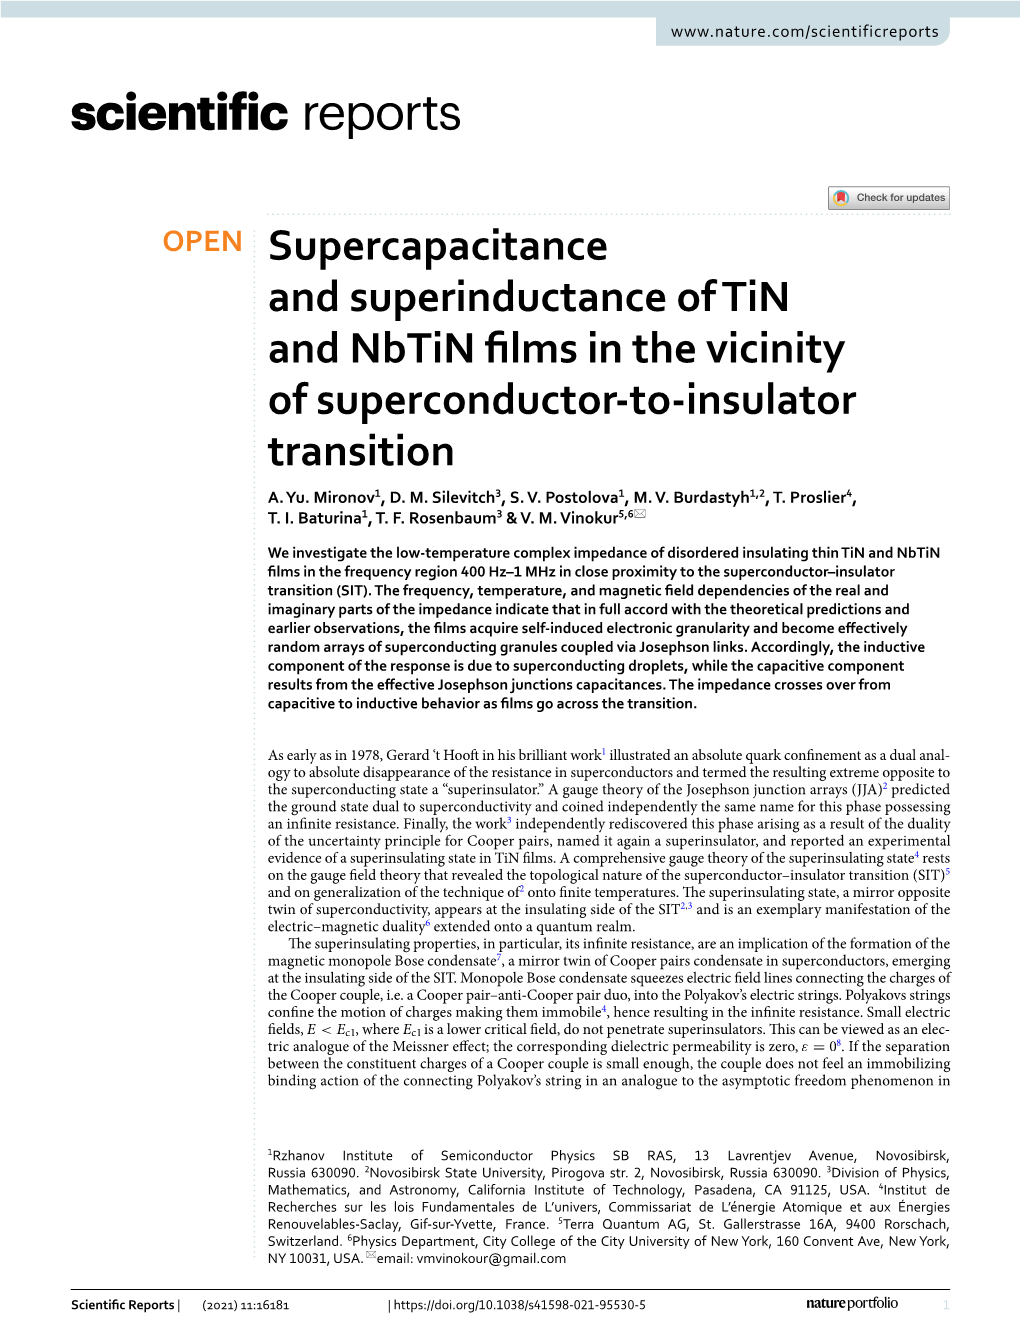 Supercapacitance and Superinductance of Tin and Nbtin Flms in the Vicinity of Superconductor‑To‑Insulator Transition A